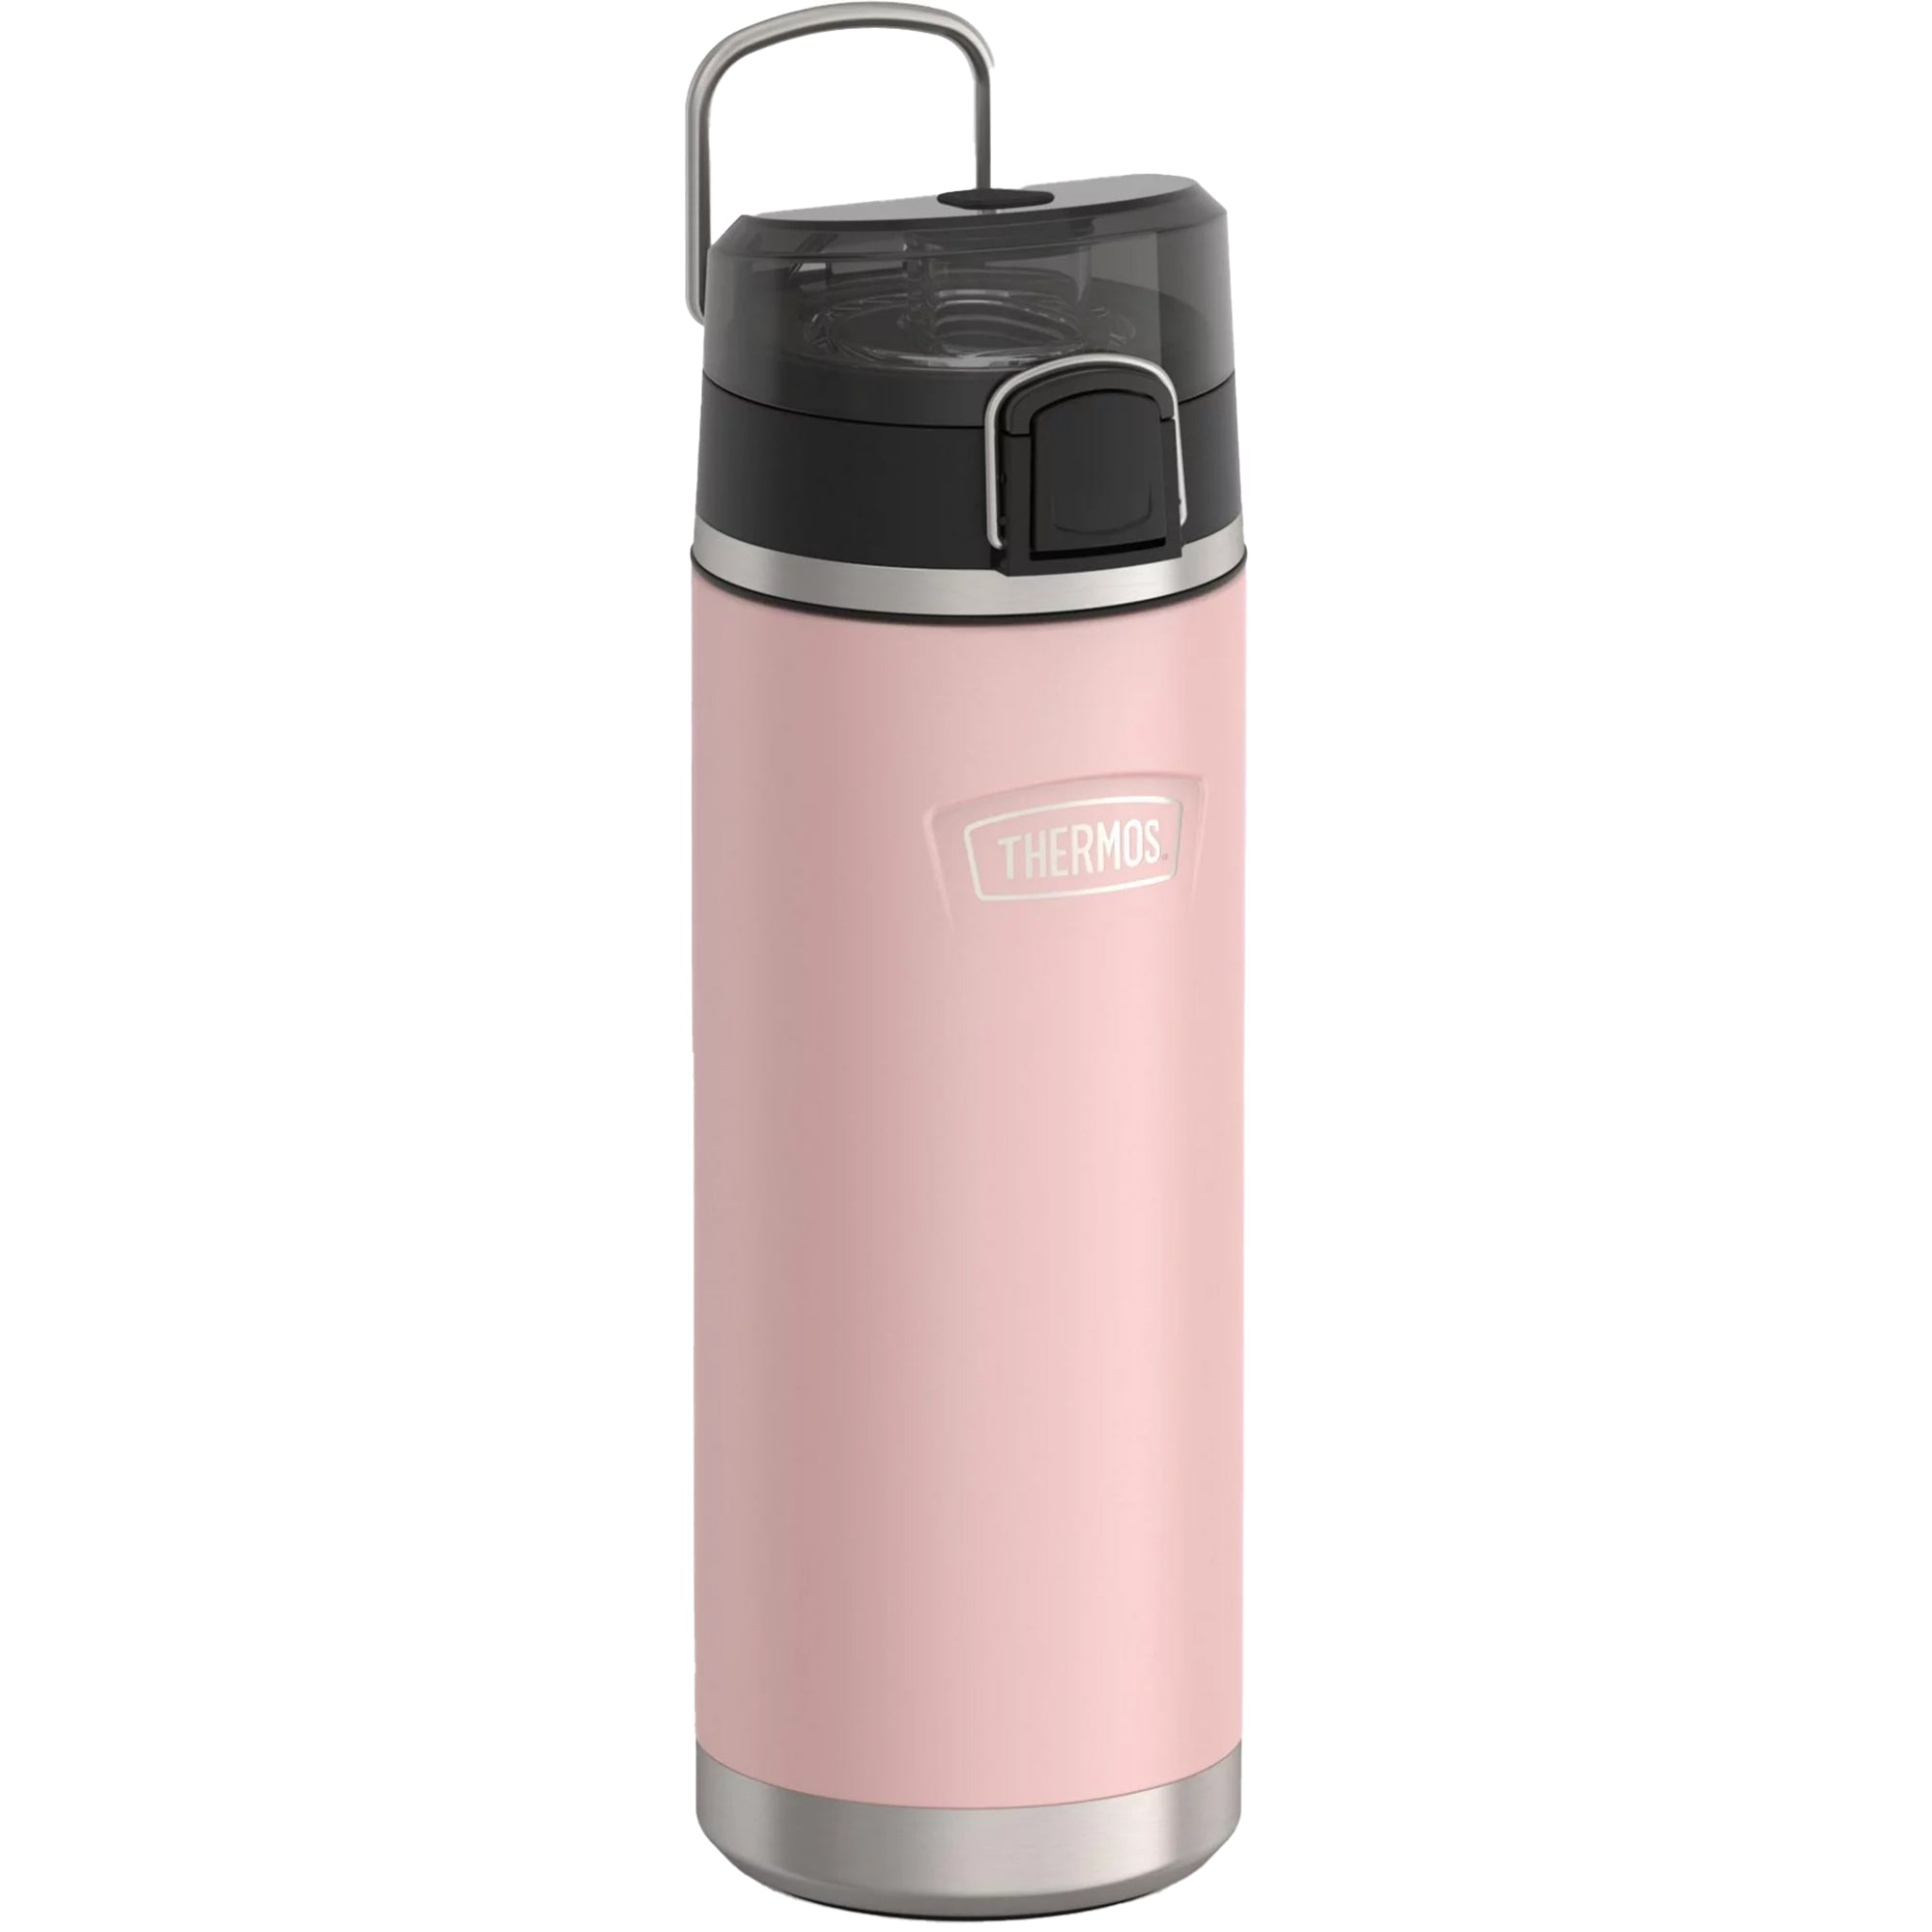 Thermos 24 oz. Icon Vacuum Insulated Stainless Steel Spout Water Bottle Thermos